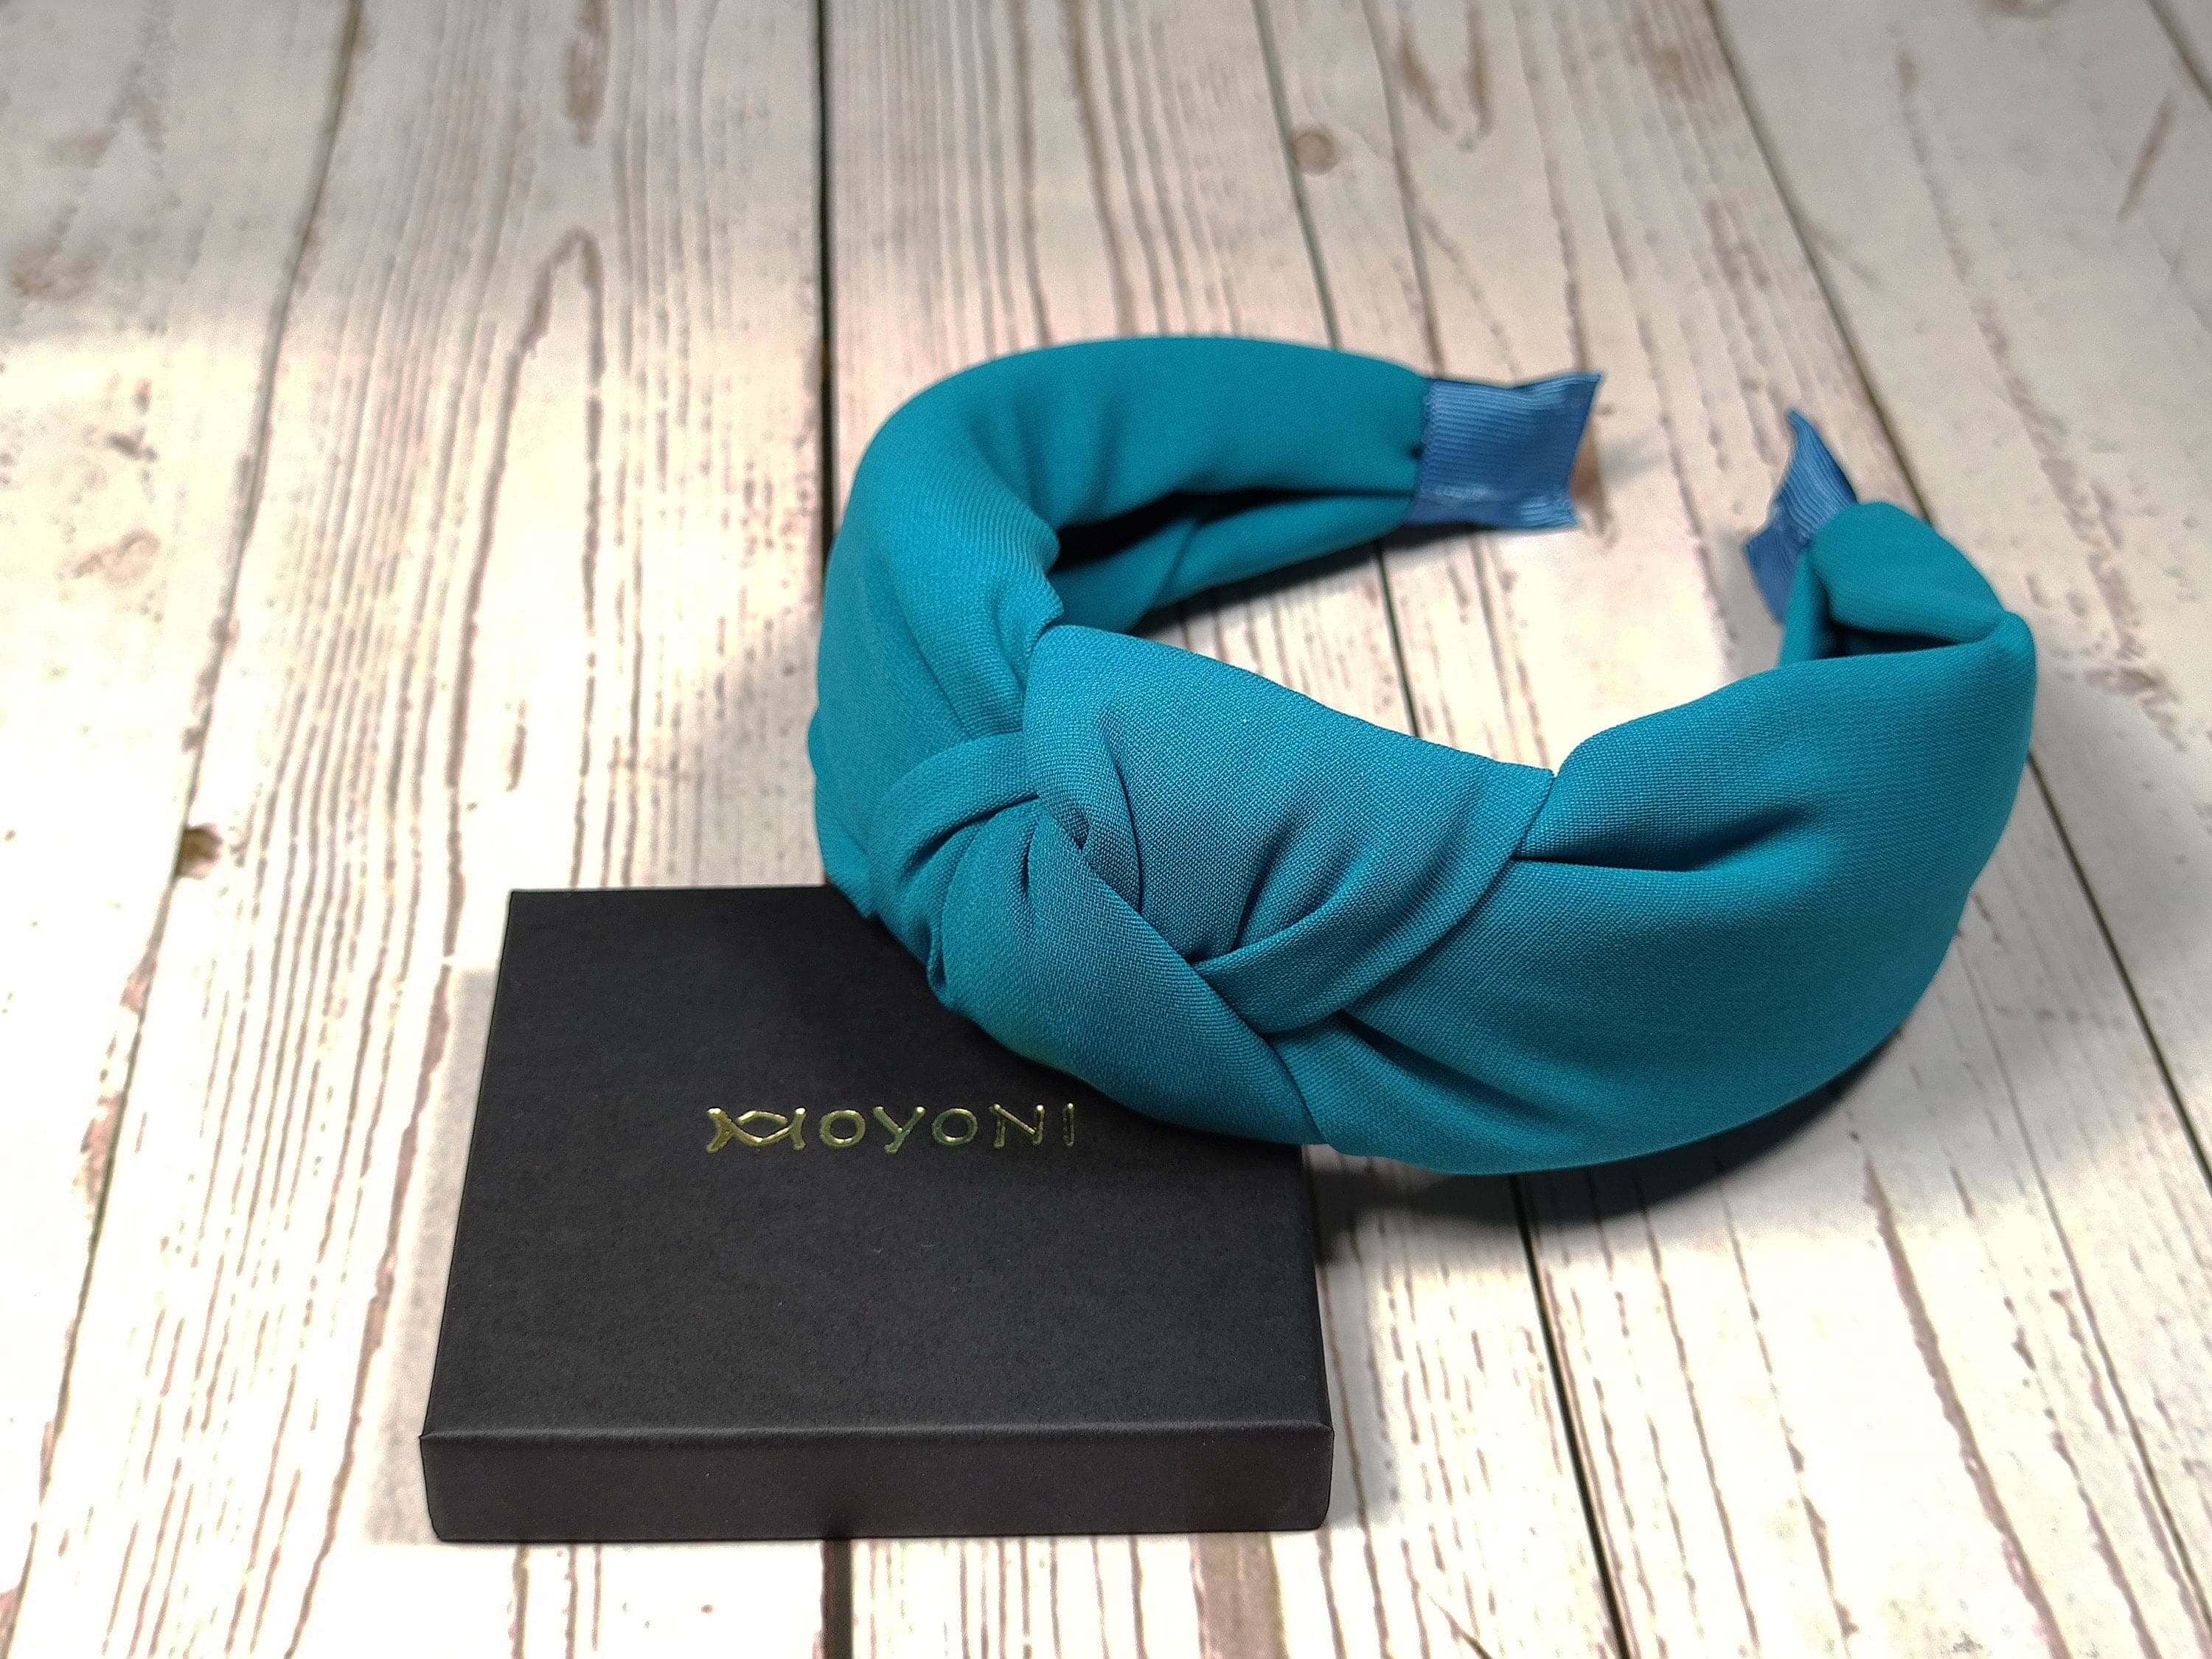 Get your daily dose of color with the Turquoise Color Crepe Headband. This headband comes in a variety of stylish designs and is perfect for a sunny day.